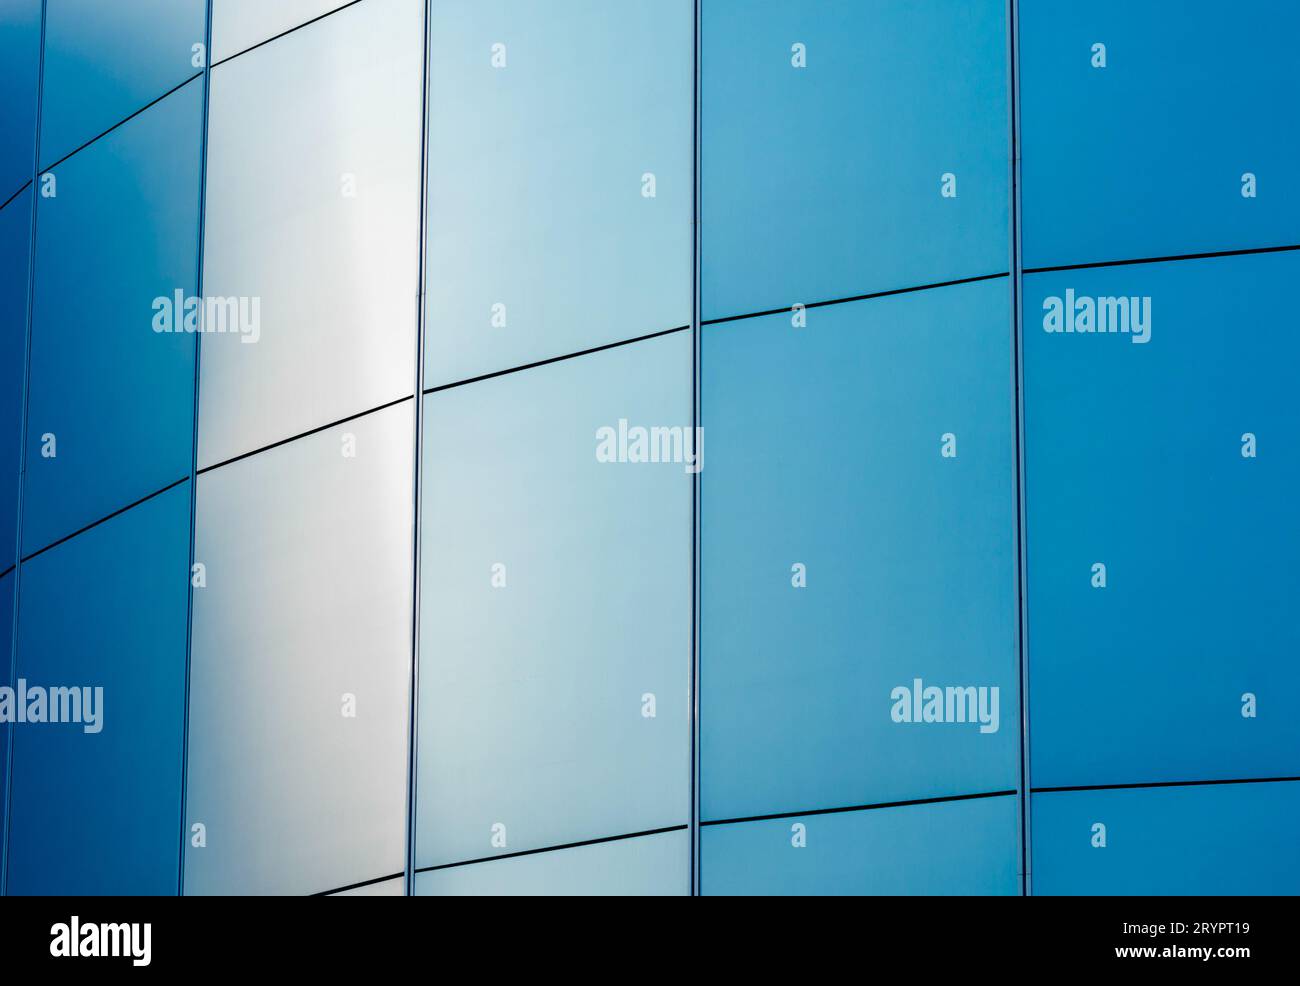 Wall of the building with blue panels Stock Photo